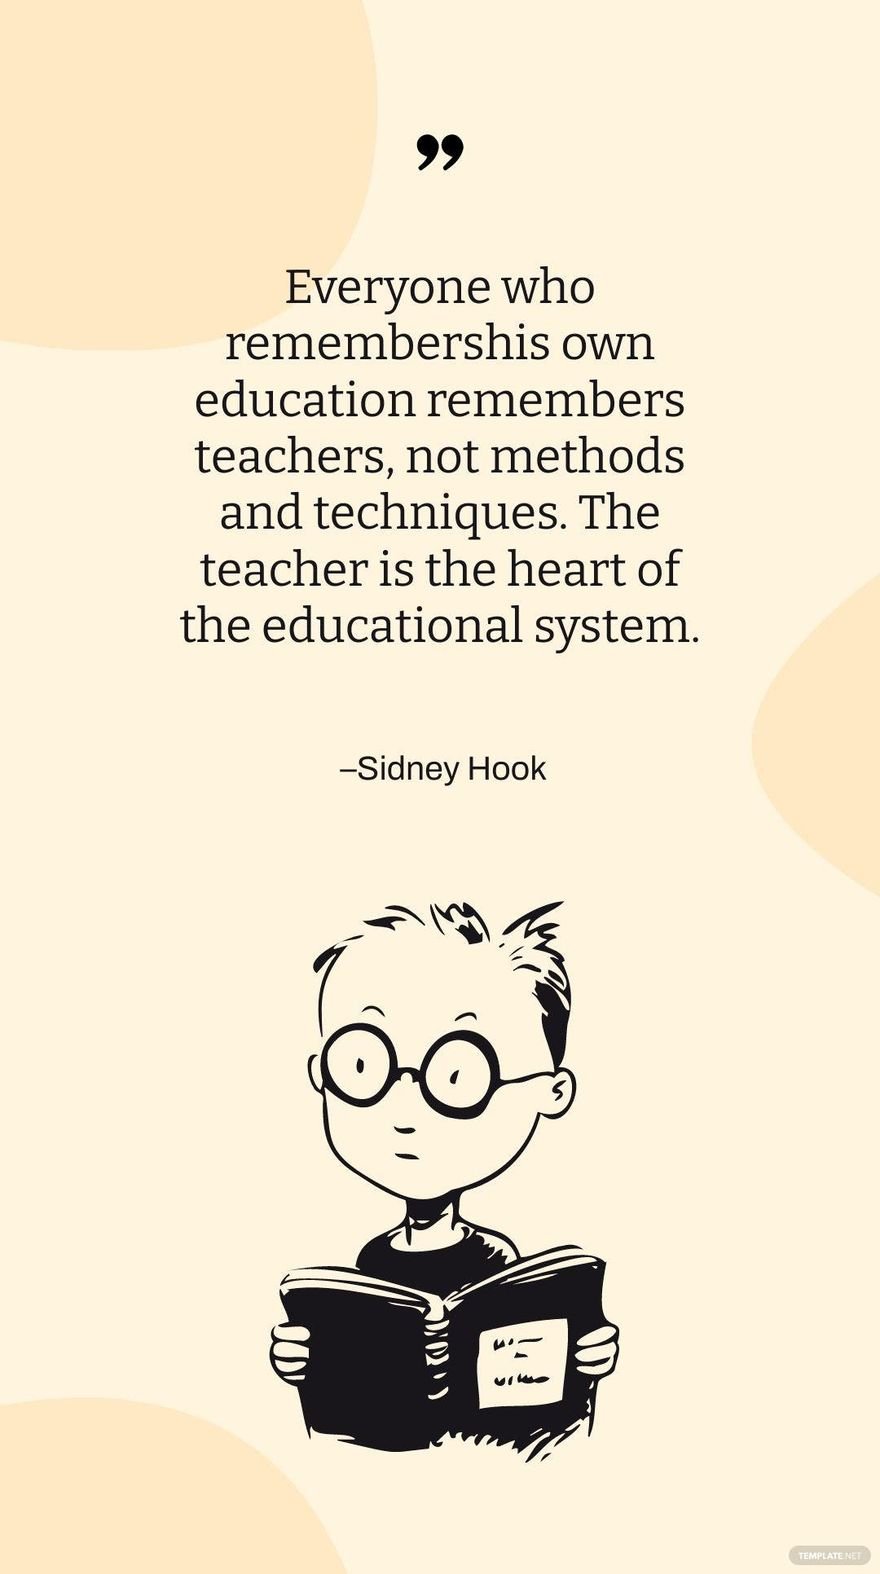 Sidney Hook - Everyone who remembers his own education remembers teachers, not methods and techniques. The teacher is the heart of the educational system.